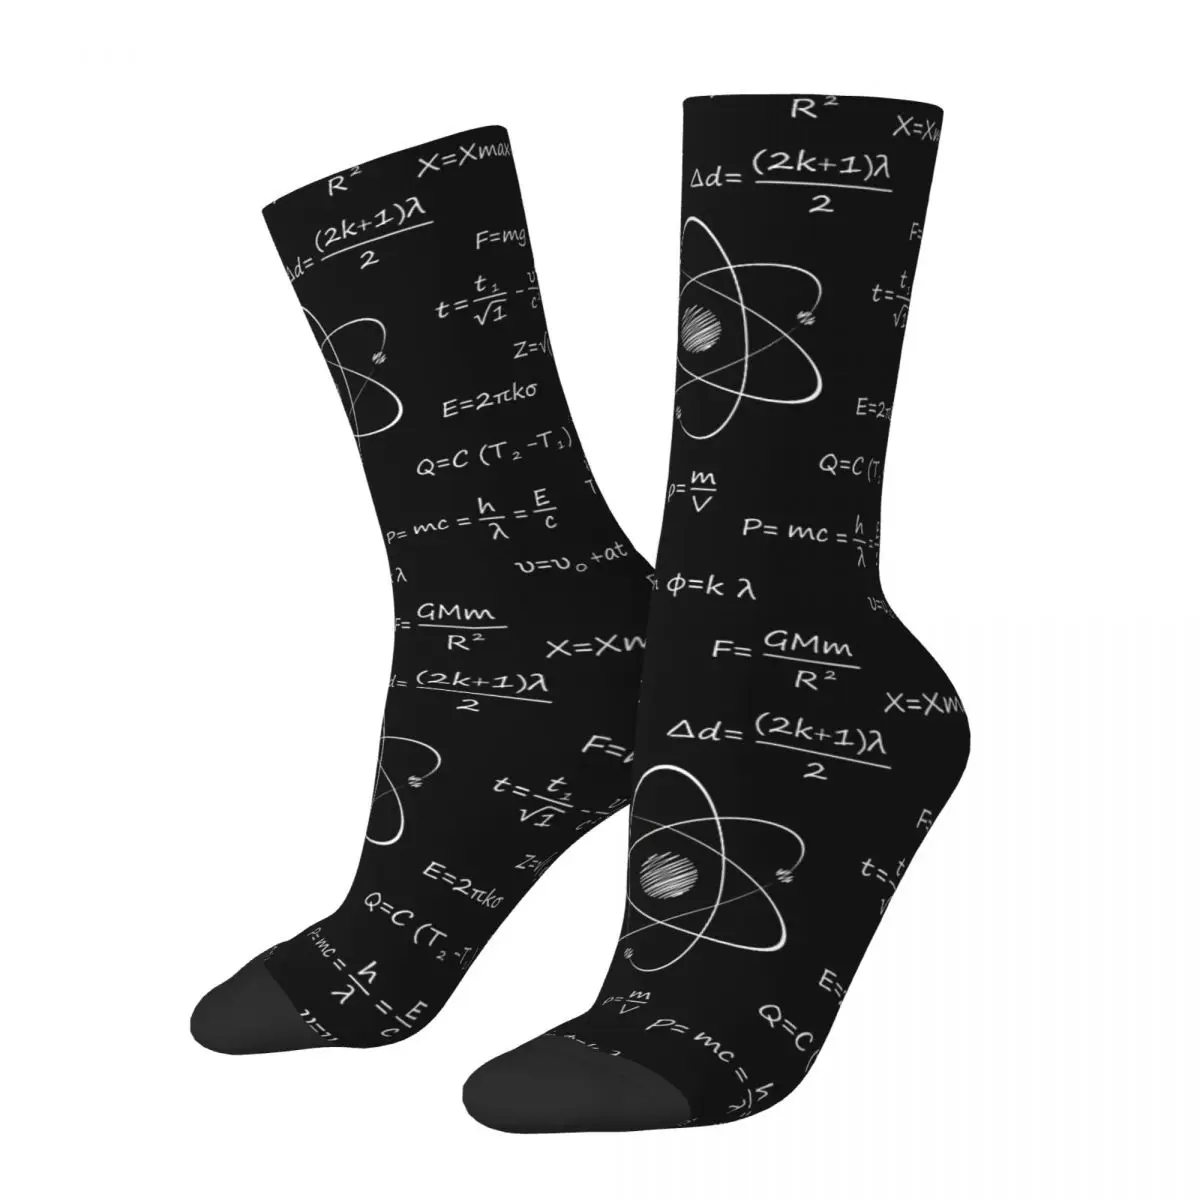 

Funny Crazy Sock for Men At Hip Hop Harajuku Amazing Chemistry Happy Quality Pattern Printed Boys Crew compression Sock Novelty